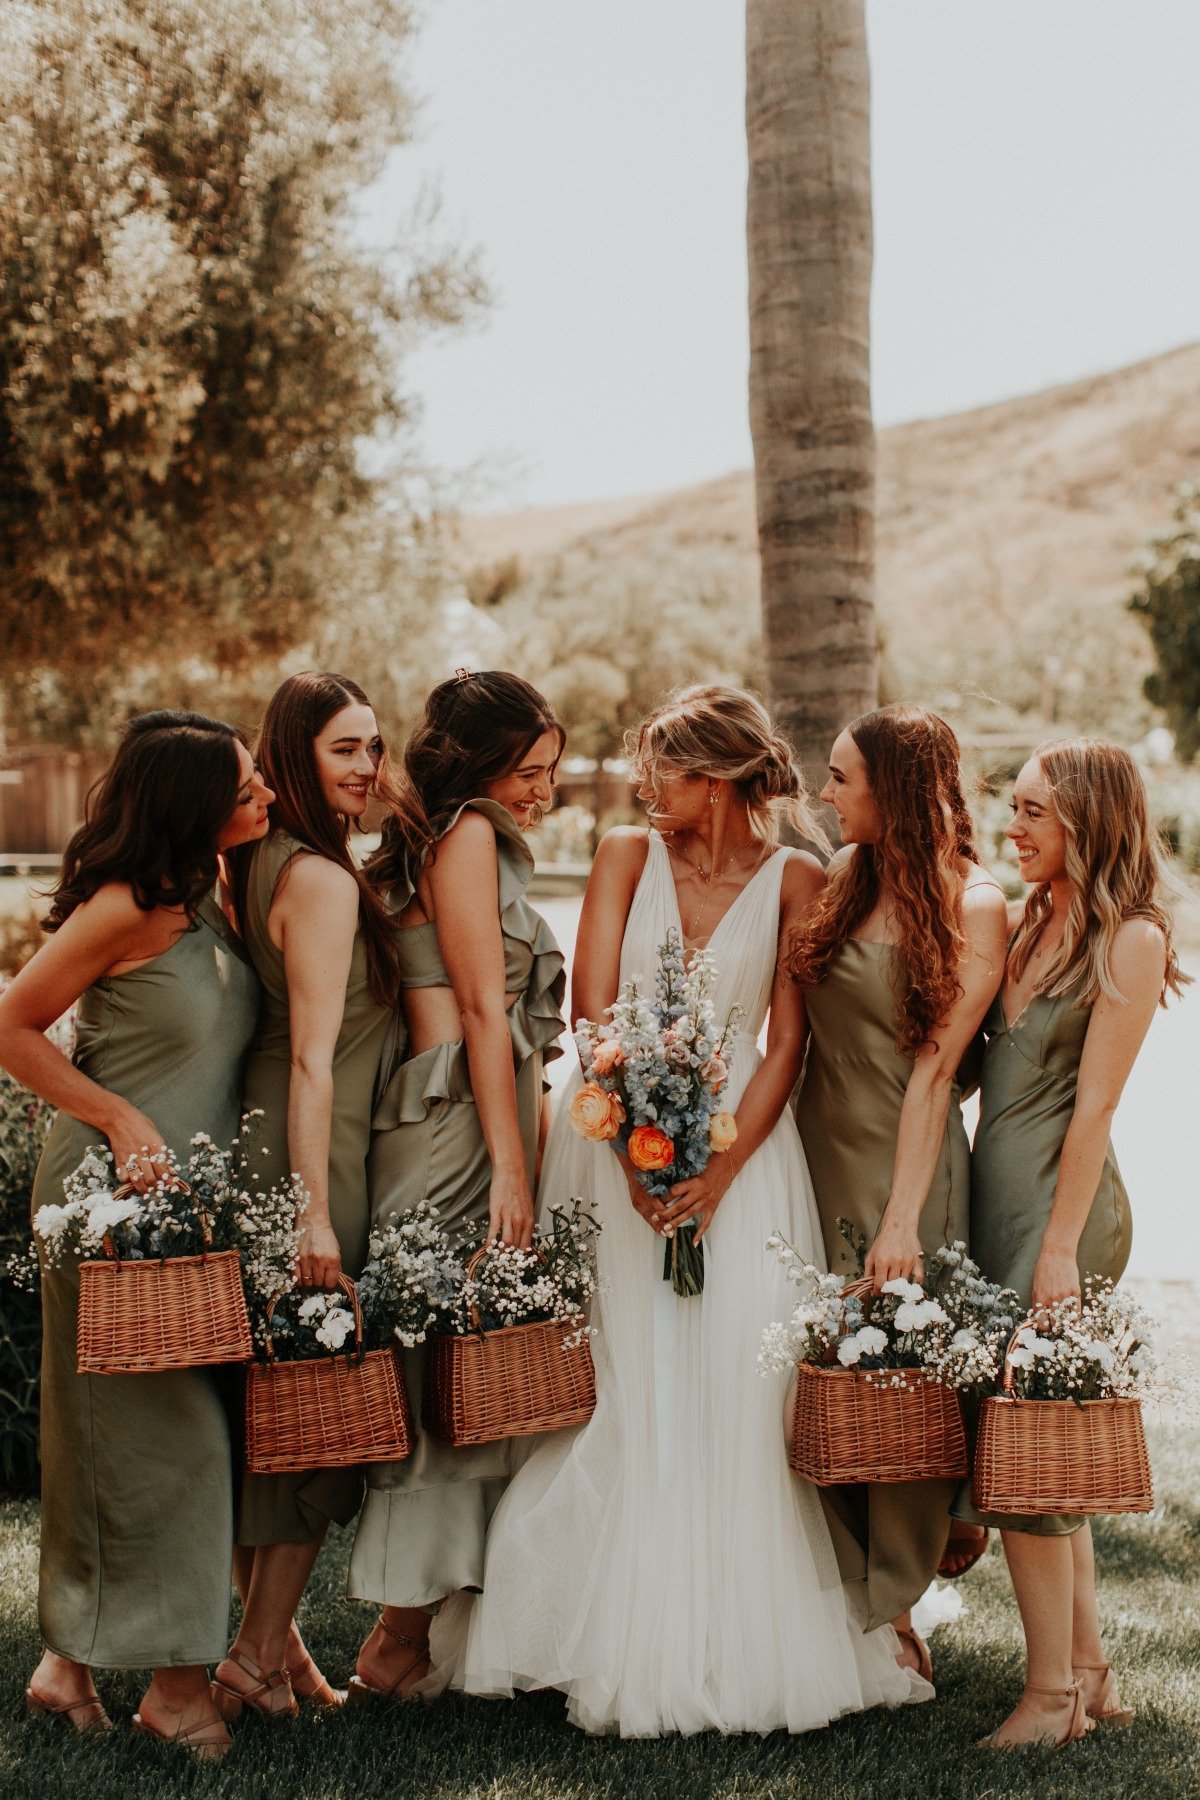 Handmade bridal party bouquets 